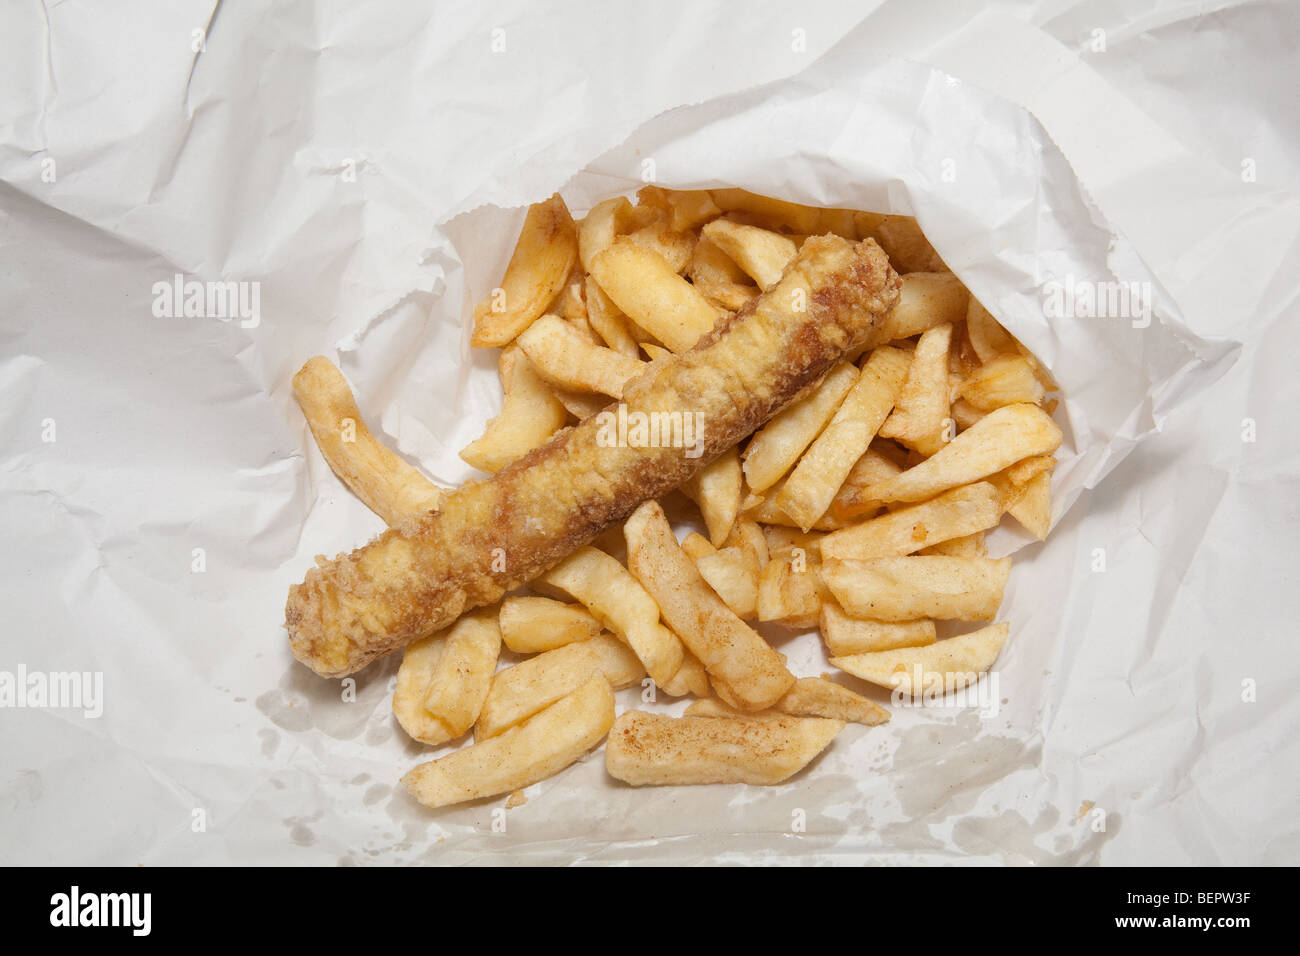 Take away sausage or saveloy and chips wrapped in white paper. Stock Photo